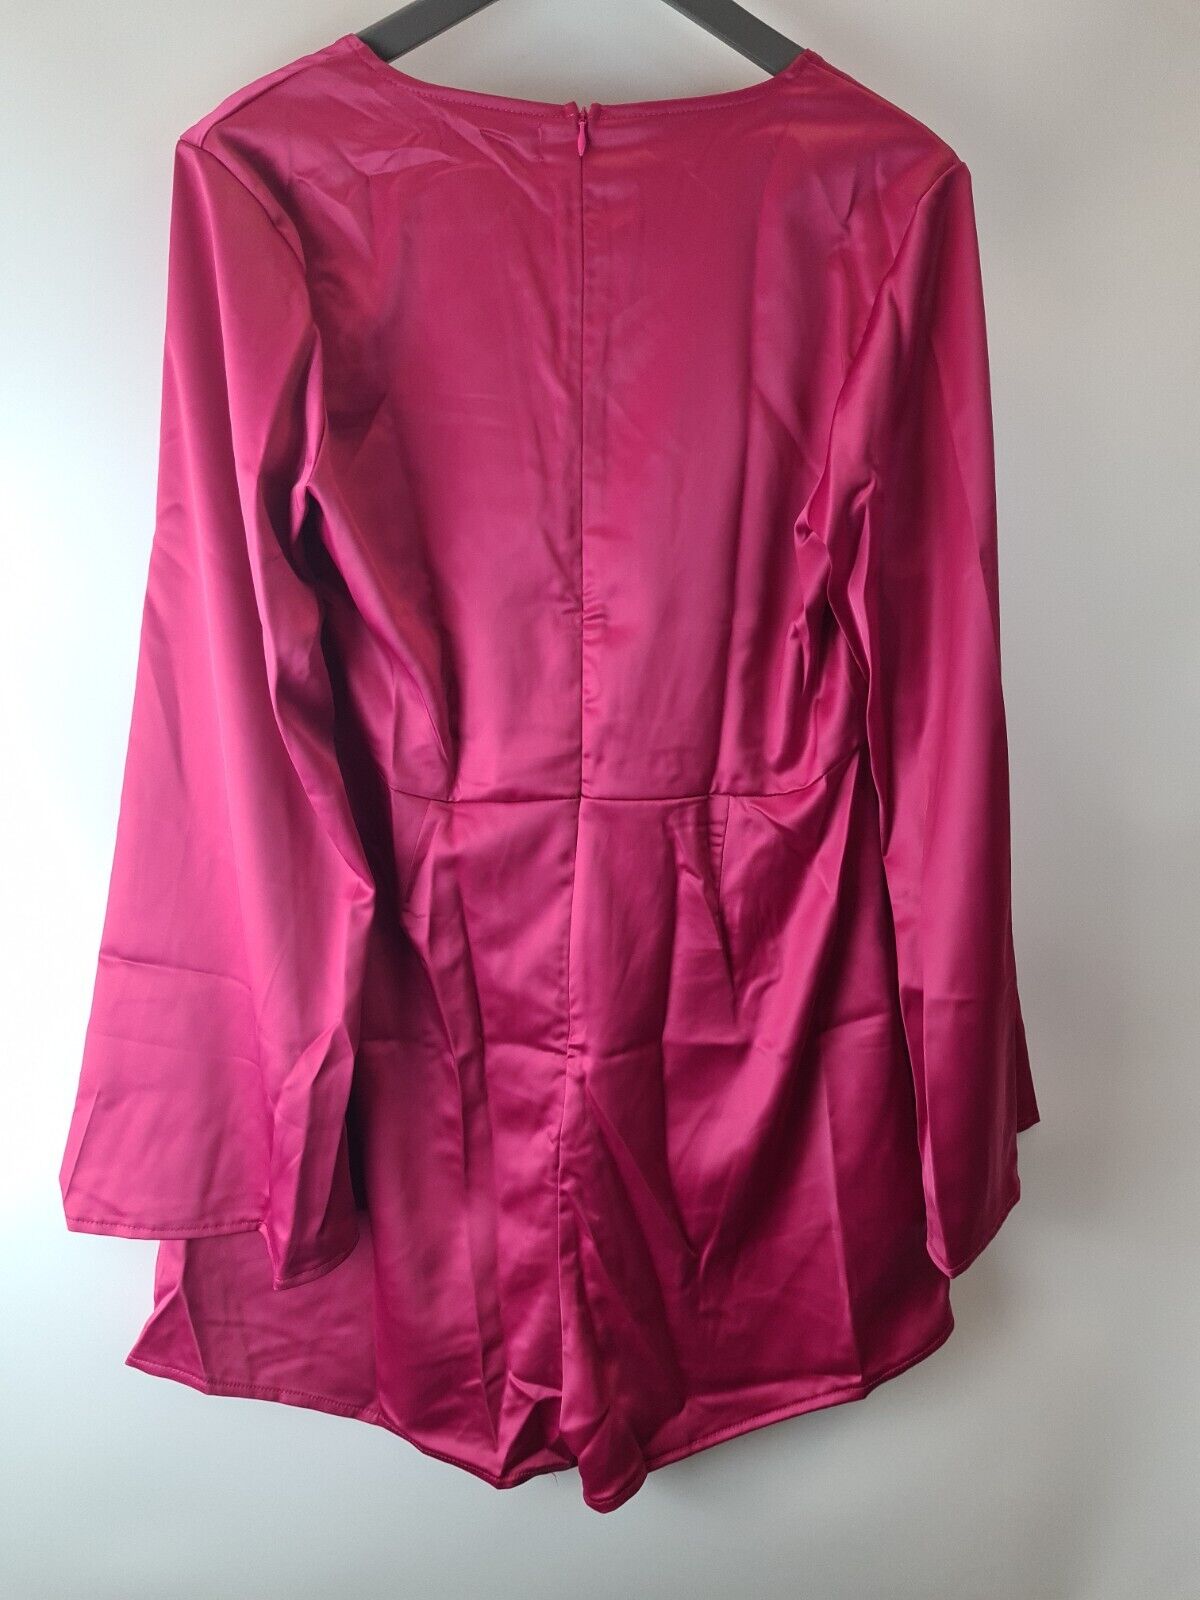 Missguided. Satin Tie Front Flare Sleeves Hot Pink Playsuit Size 14.